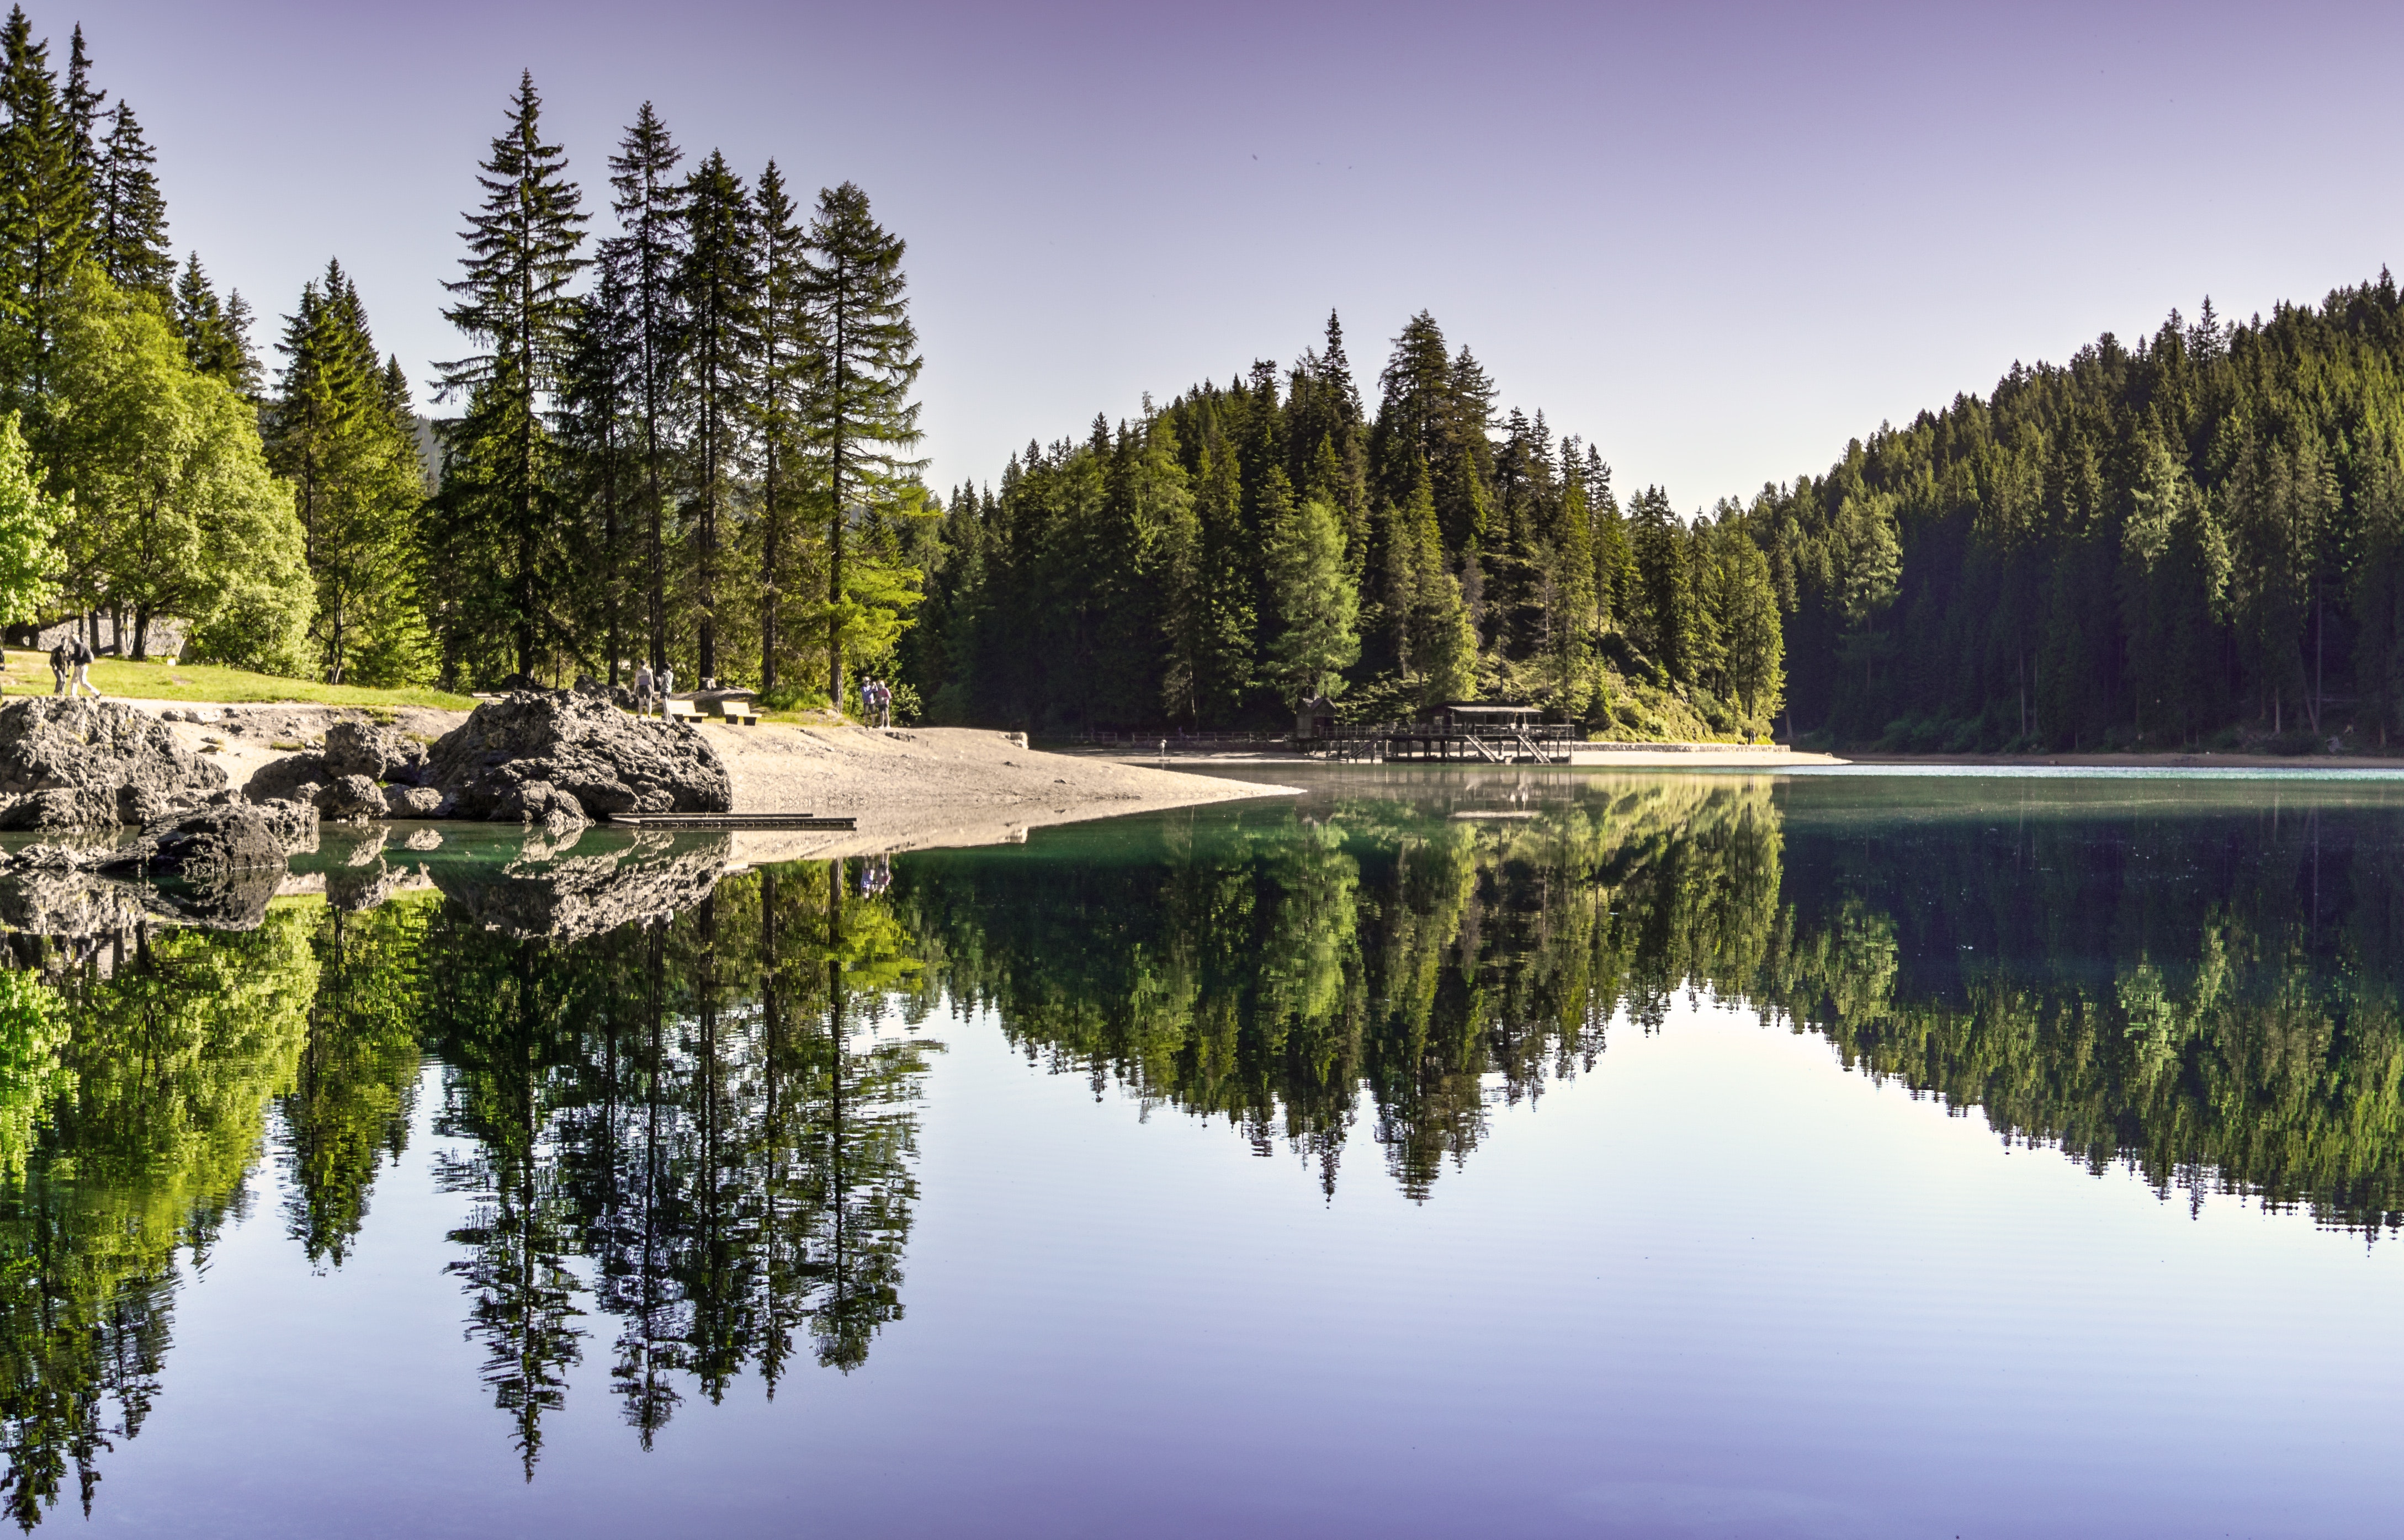 General 4355x2790 landscape nature lake reflection forest pine trees trees calm waters